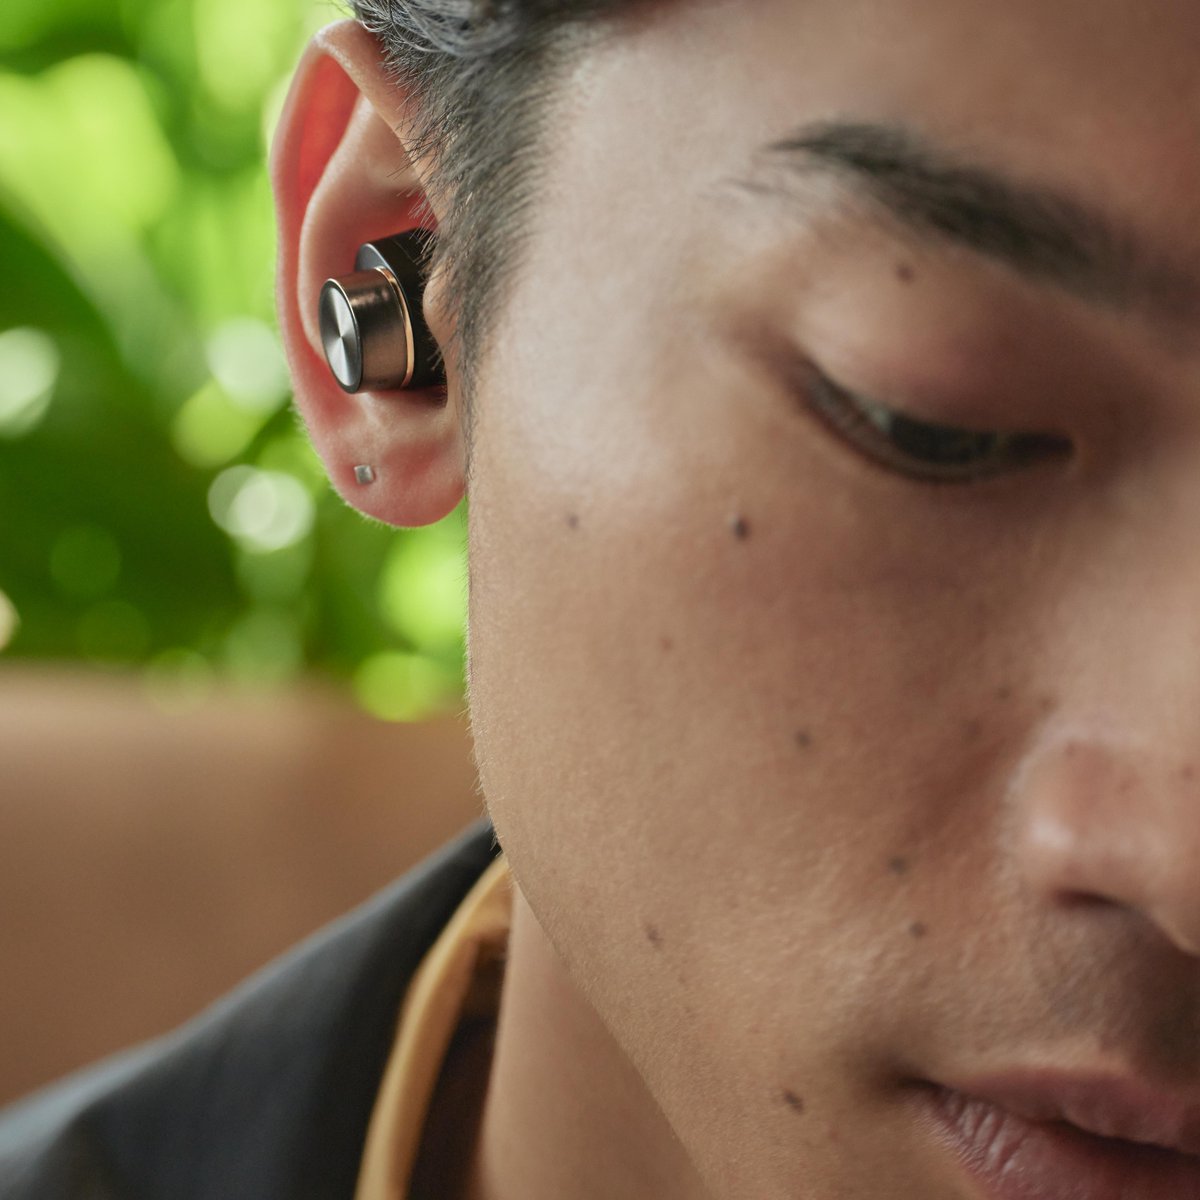 Thanks to a true 24-bit connection between the left and right earbuds, you can hear your favourite music and movies as they were meant to be heard.

#bowerswilkins #HearTrue